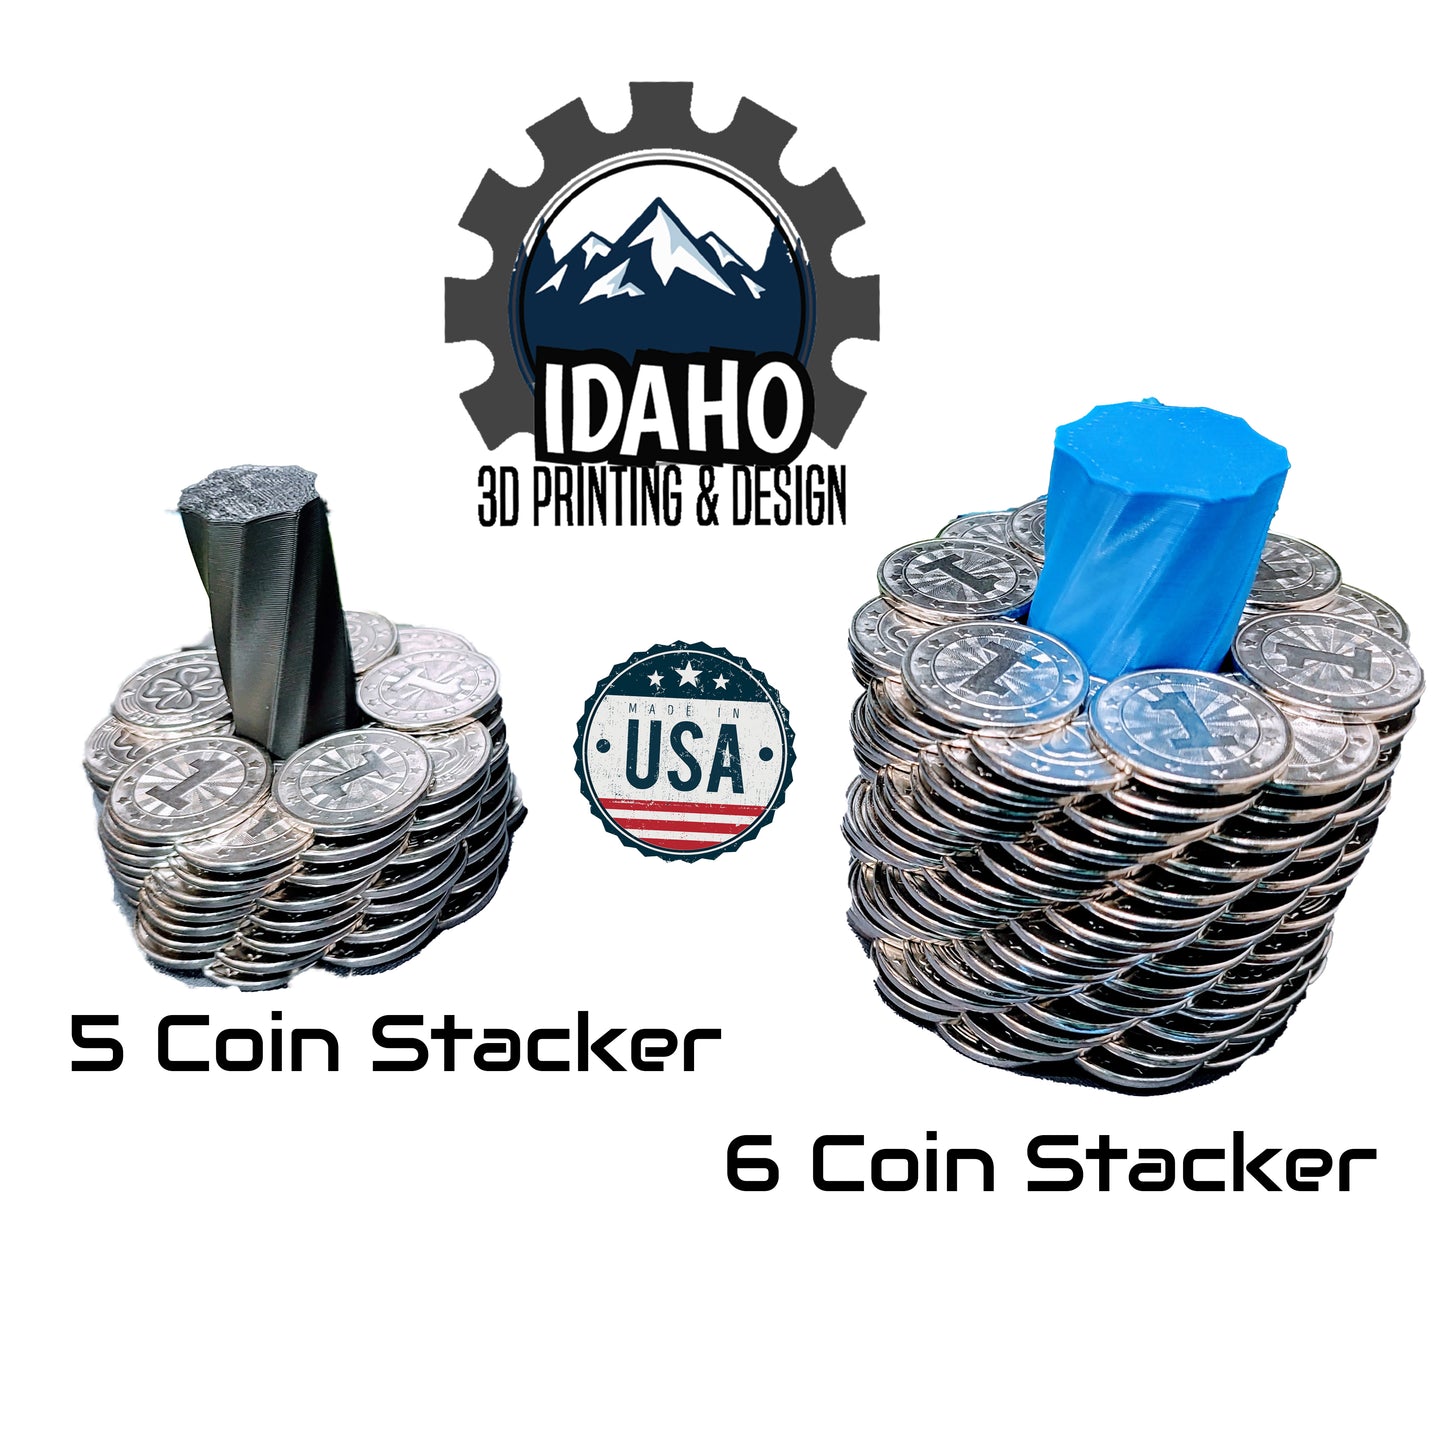 Coin Pusher Tower Stacker